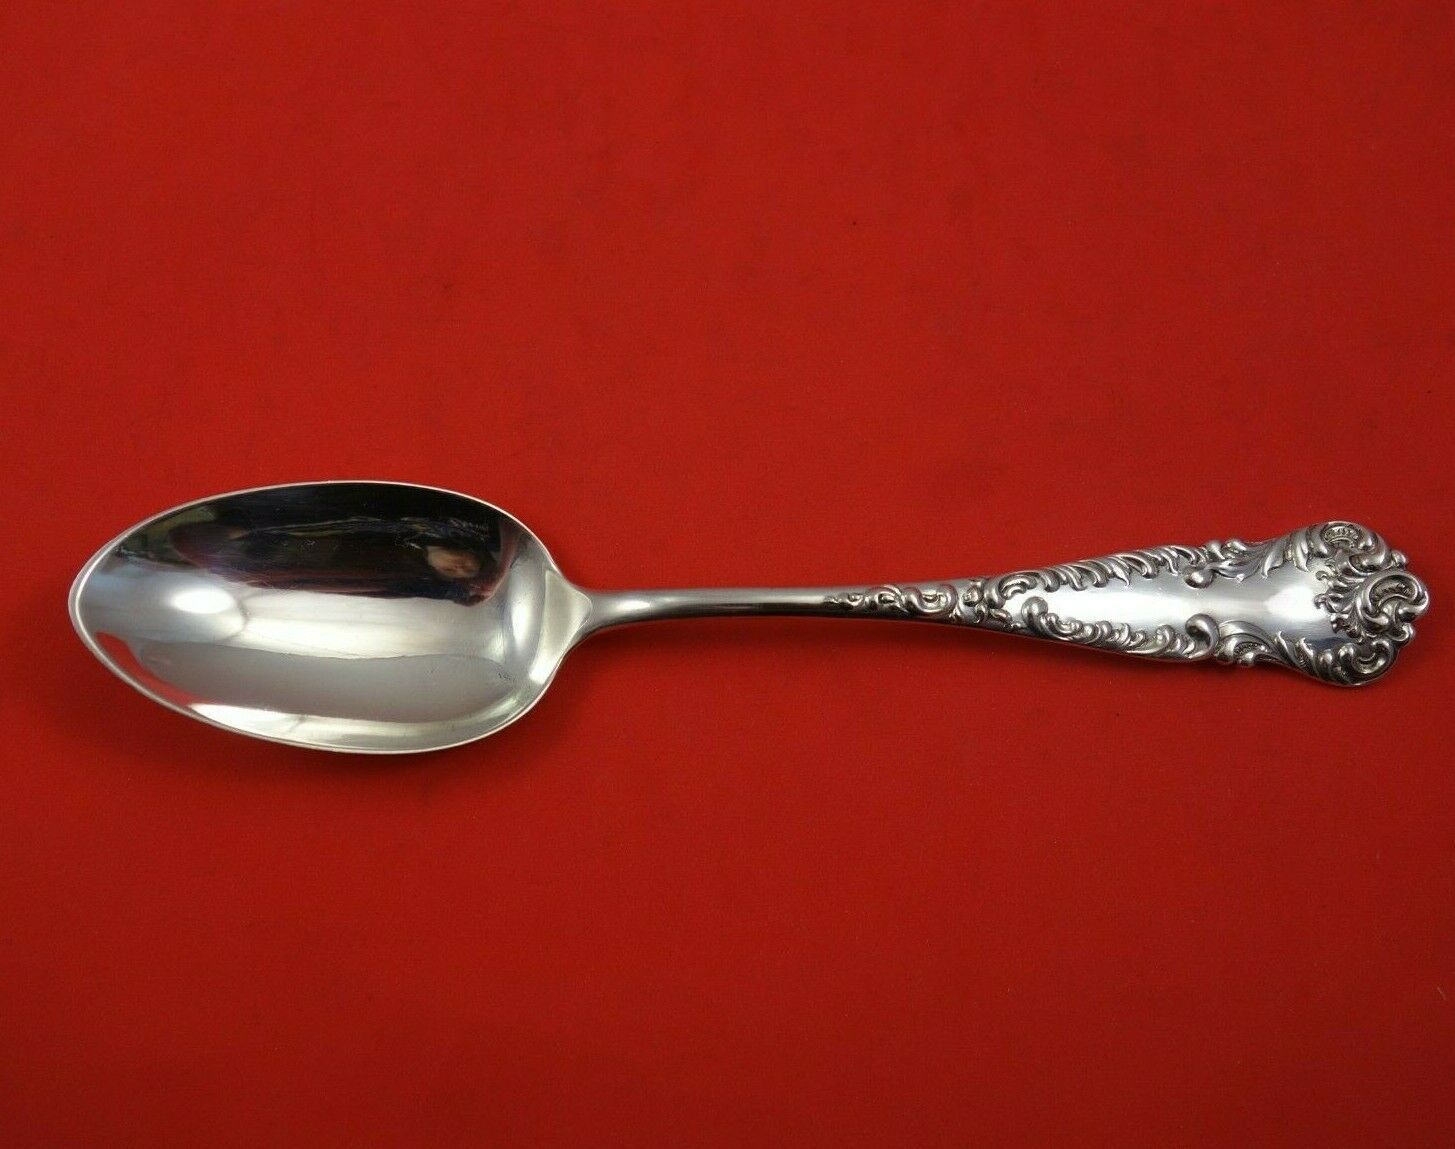 Primary image for Argo by Knowles Sterling Silver Serving Spoon 8 1/4" Silverware Heirloom